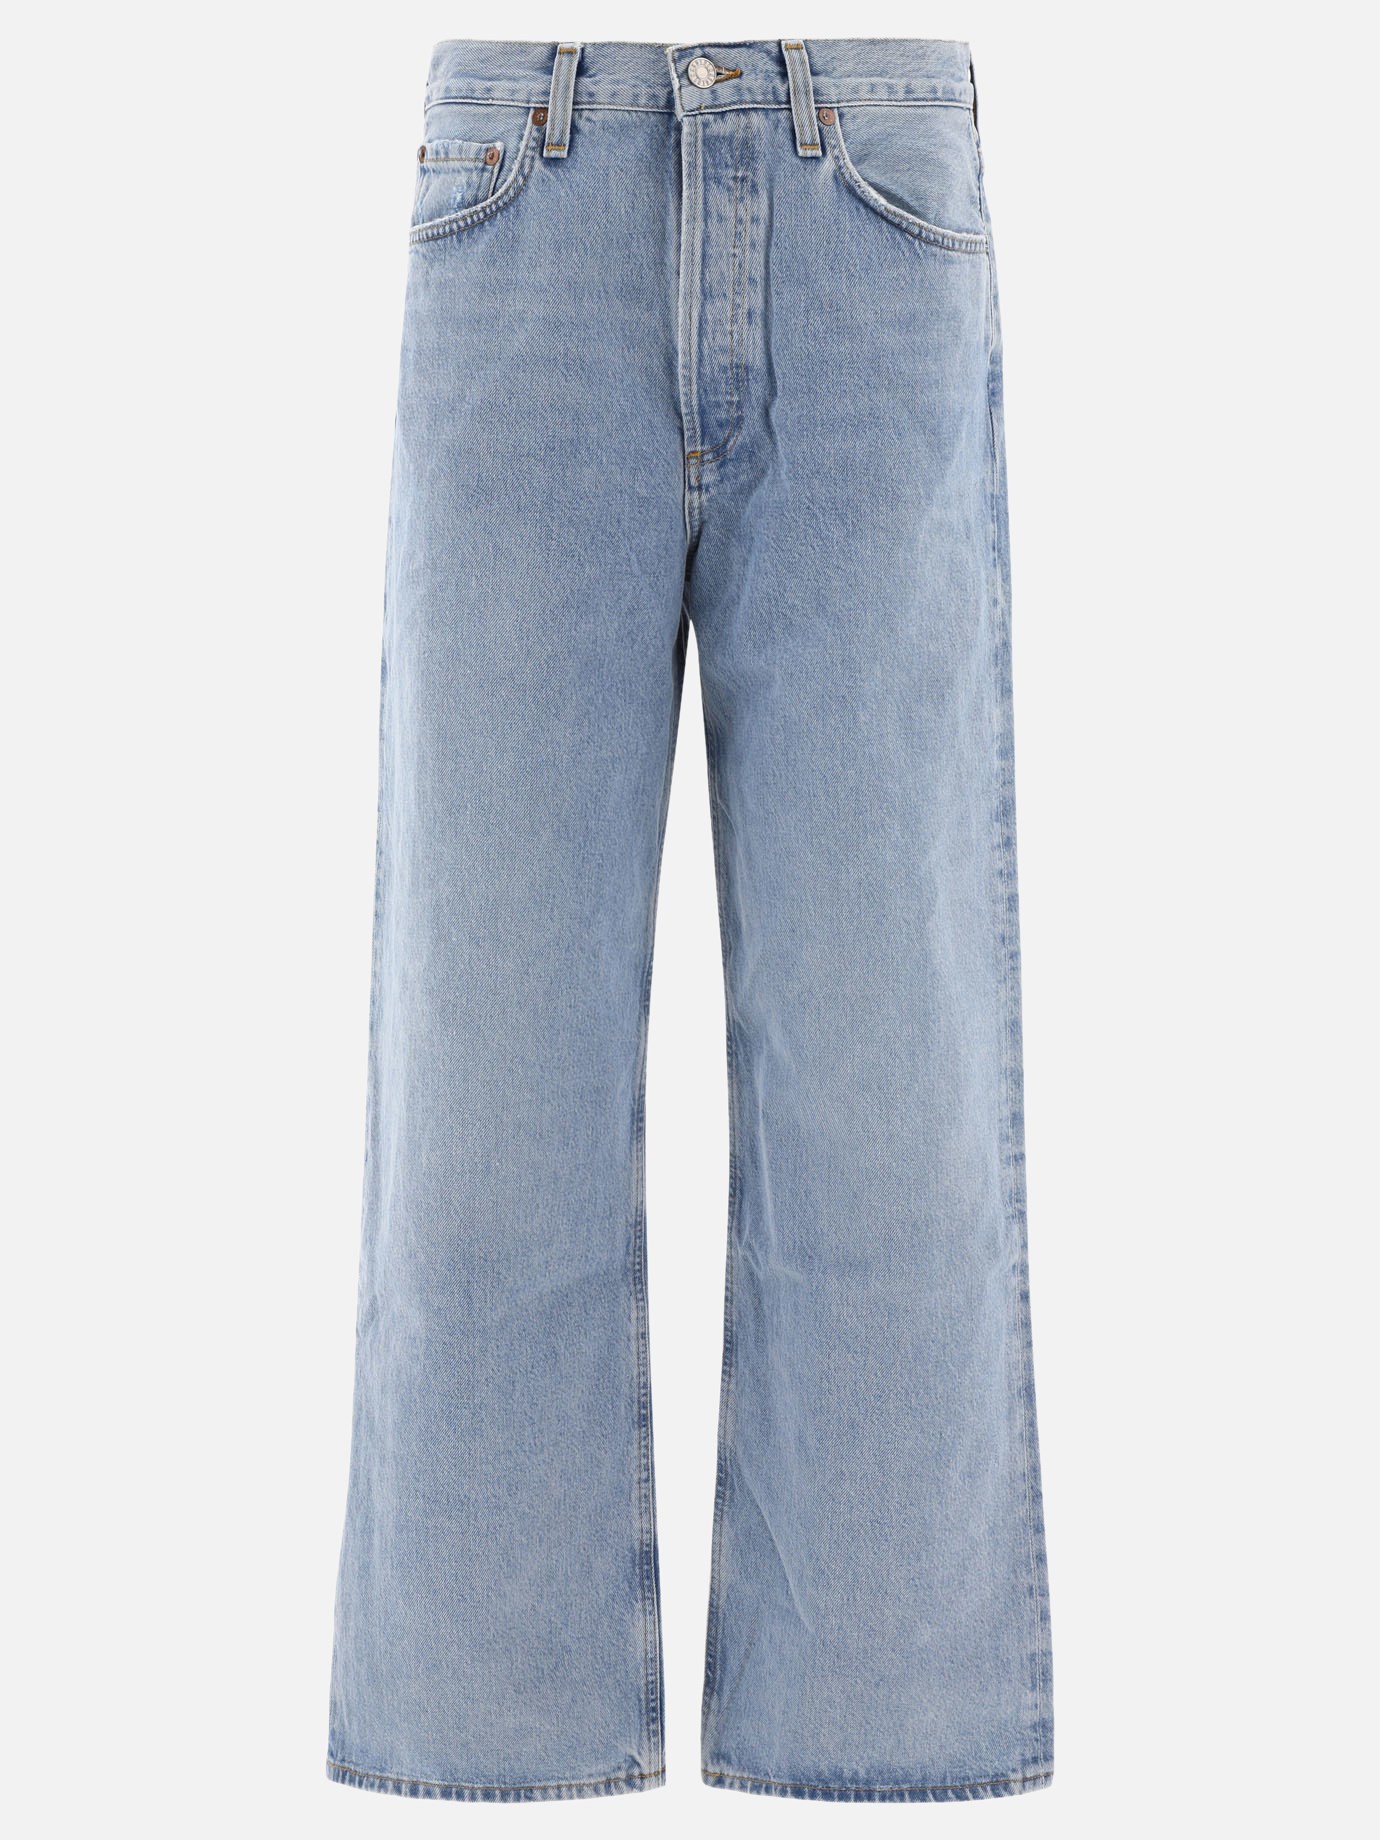  Low Rise Baggy  jeansby Agolde - 0